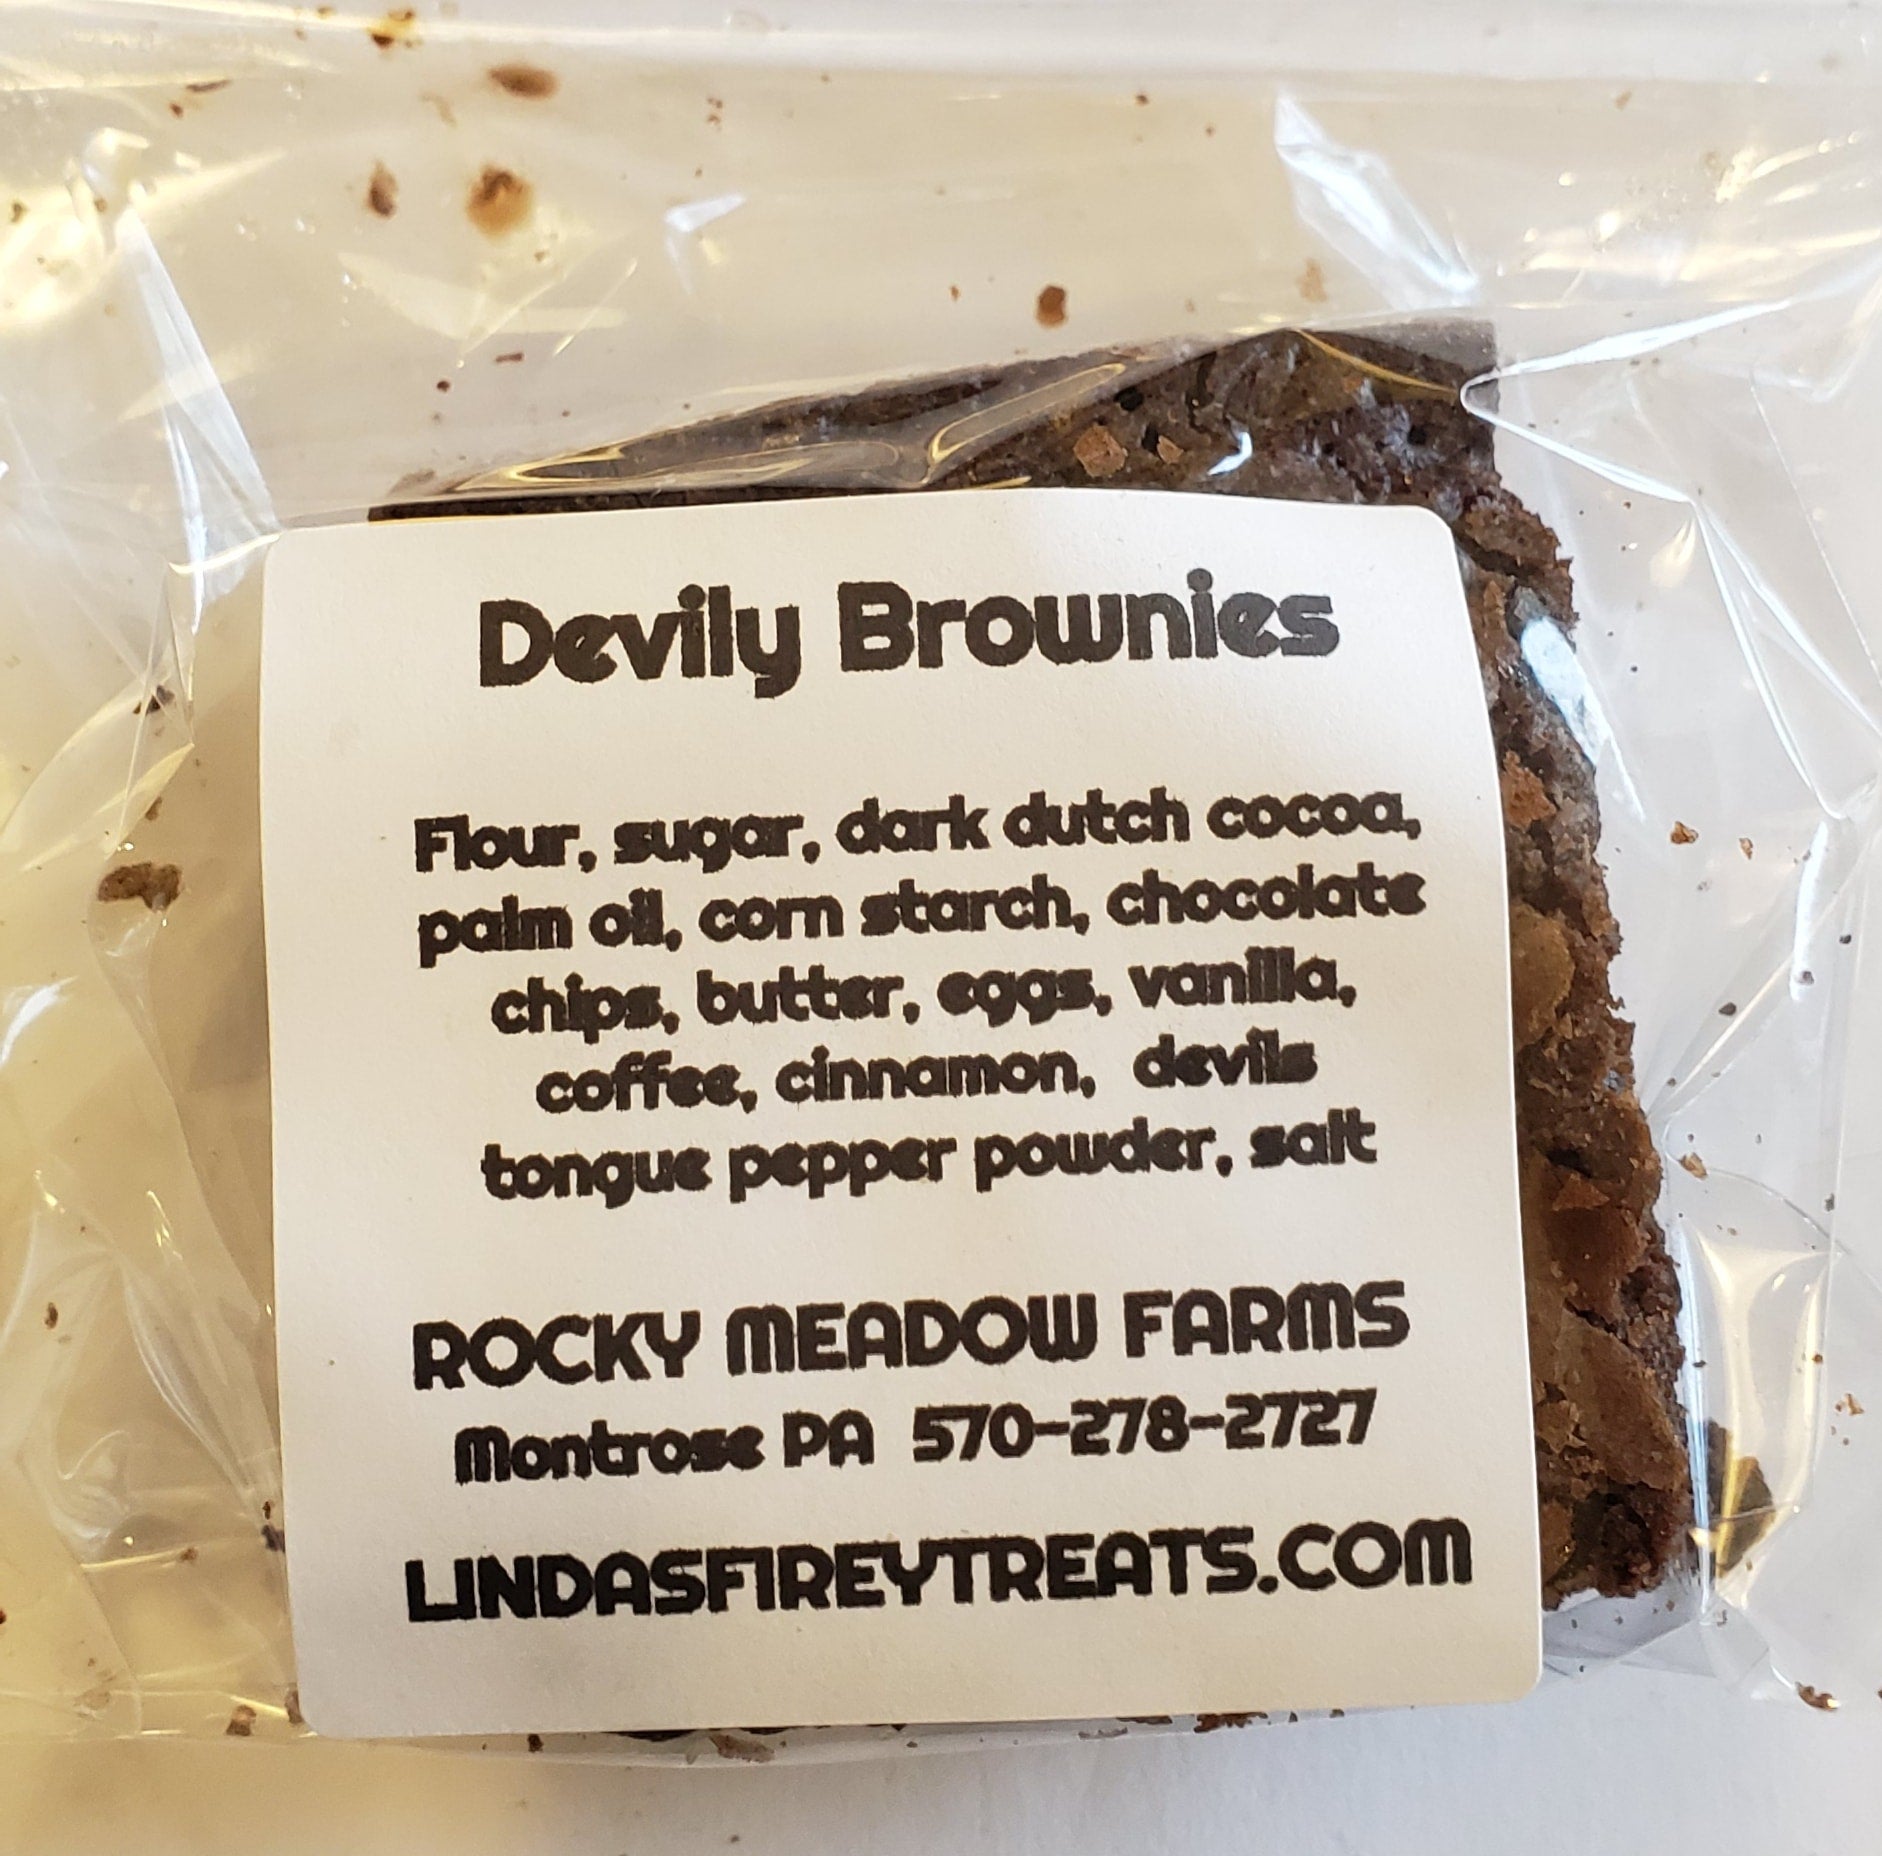 Devily Brownies - A spiked up version of our Very Chocolatey Brownie with Devil's Tongue powder and fresh Devil's Tongue peppers. Rich and creamy in texture and flavor.  The Devil's Tongue pepper is a medium heat pepper similar to the Habanero but with it's own unique flavor. Best described as getting some of that Super Hot taste without the extreme burn. - Ingredients: Flour, Dark Dutch Cocoa, Palm Oil, Corn Starch, Chocolate Chips, Butter, Eggs, Vanilla, Coffee, Cinnamon, Devils Tongue Pepper Powder, Salt